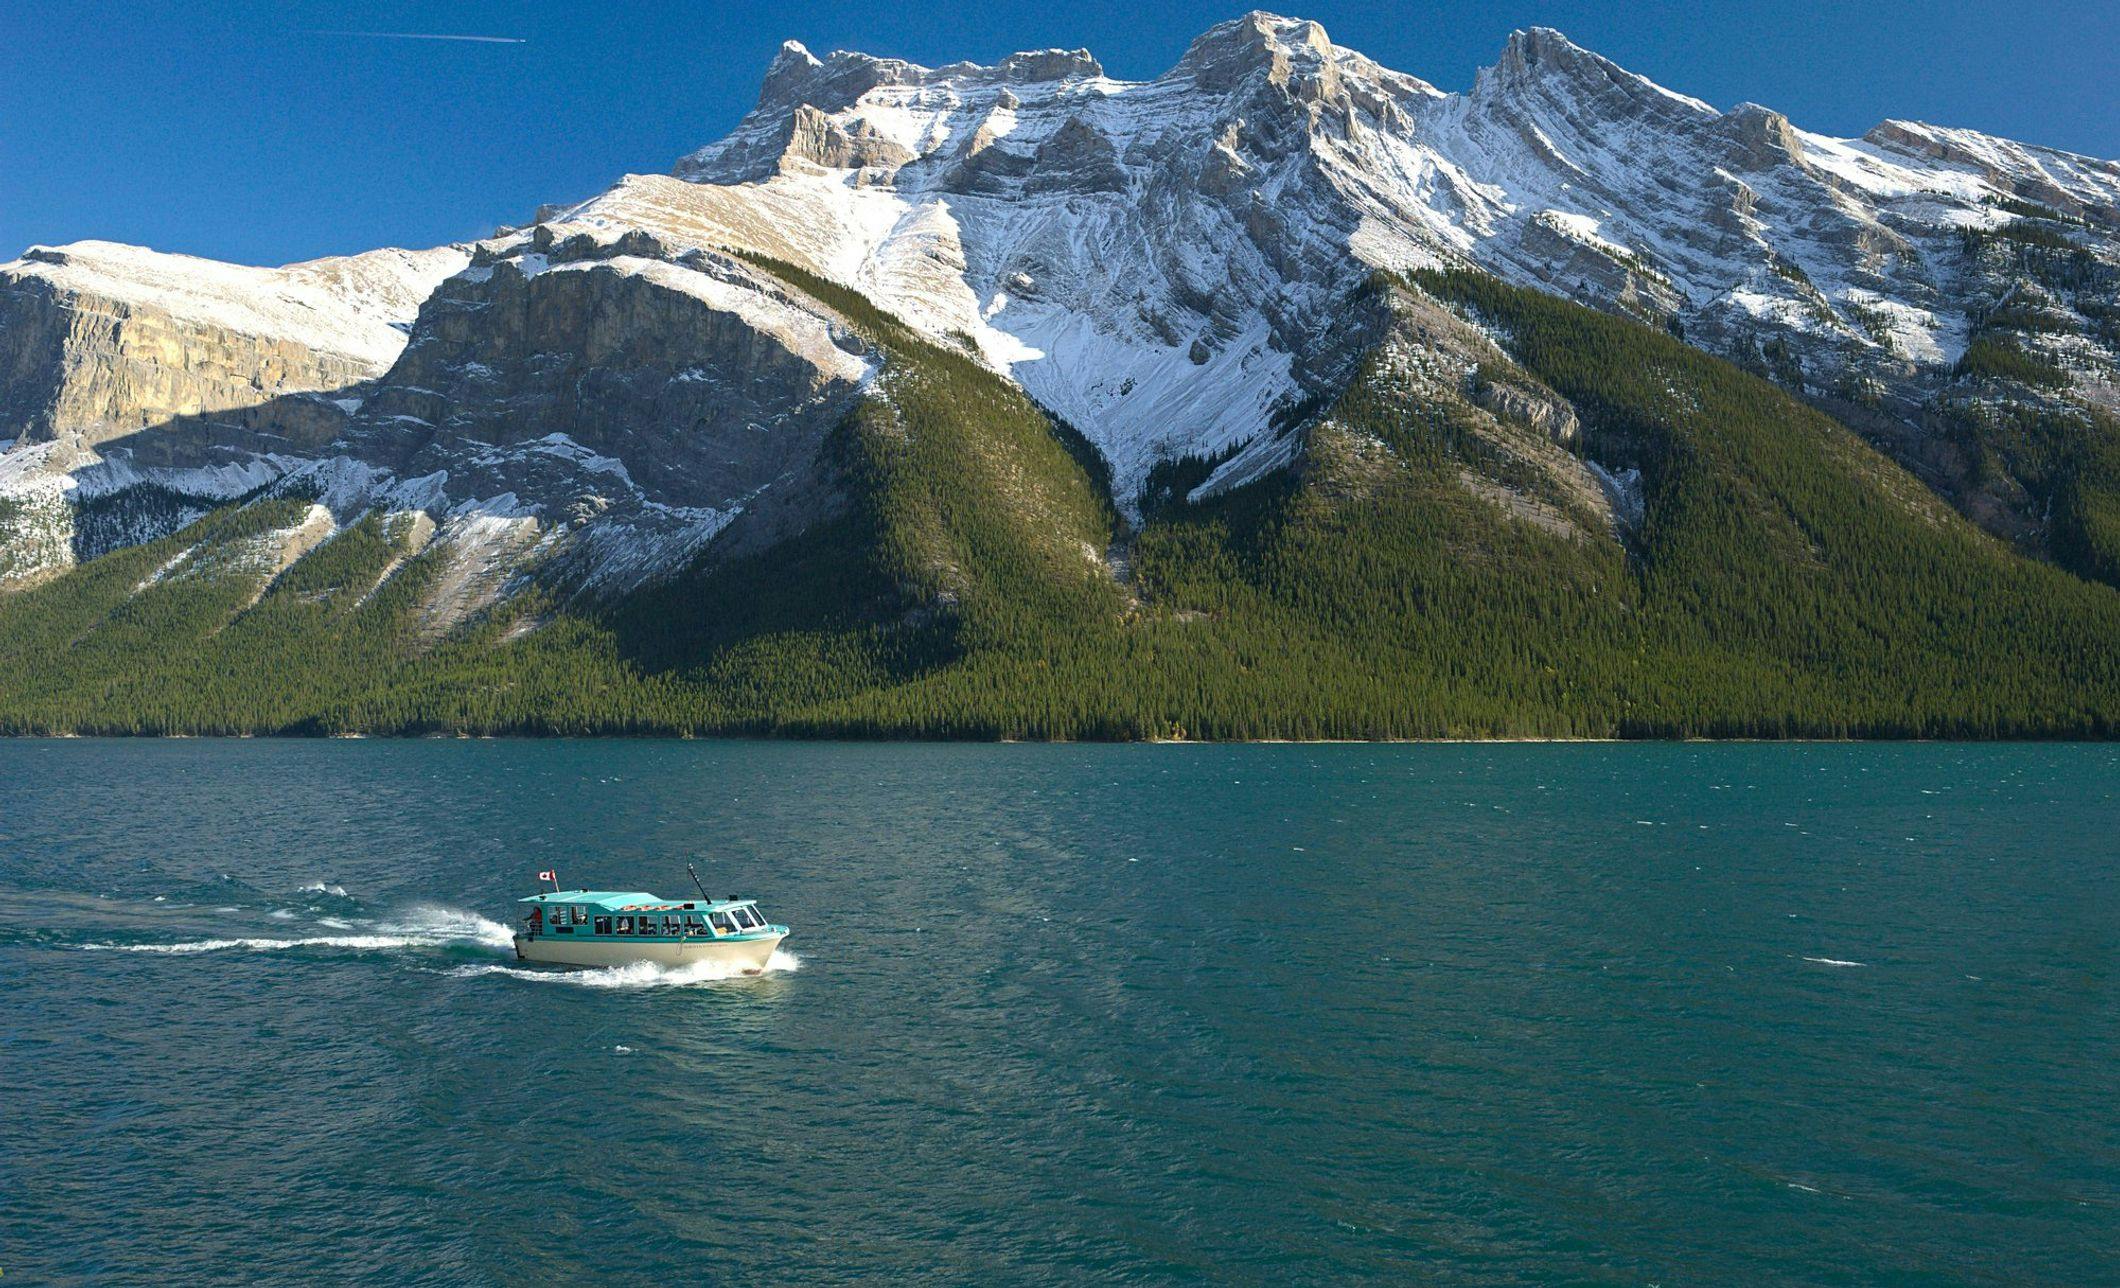 A covered sightseeing passenger boat sails along vibrant blue water with a snow-capped mountain in the background